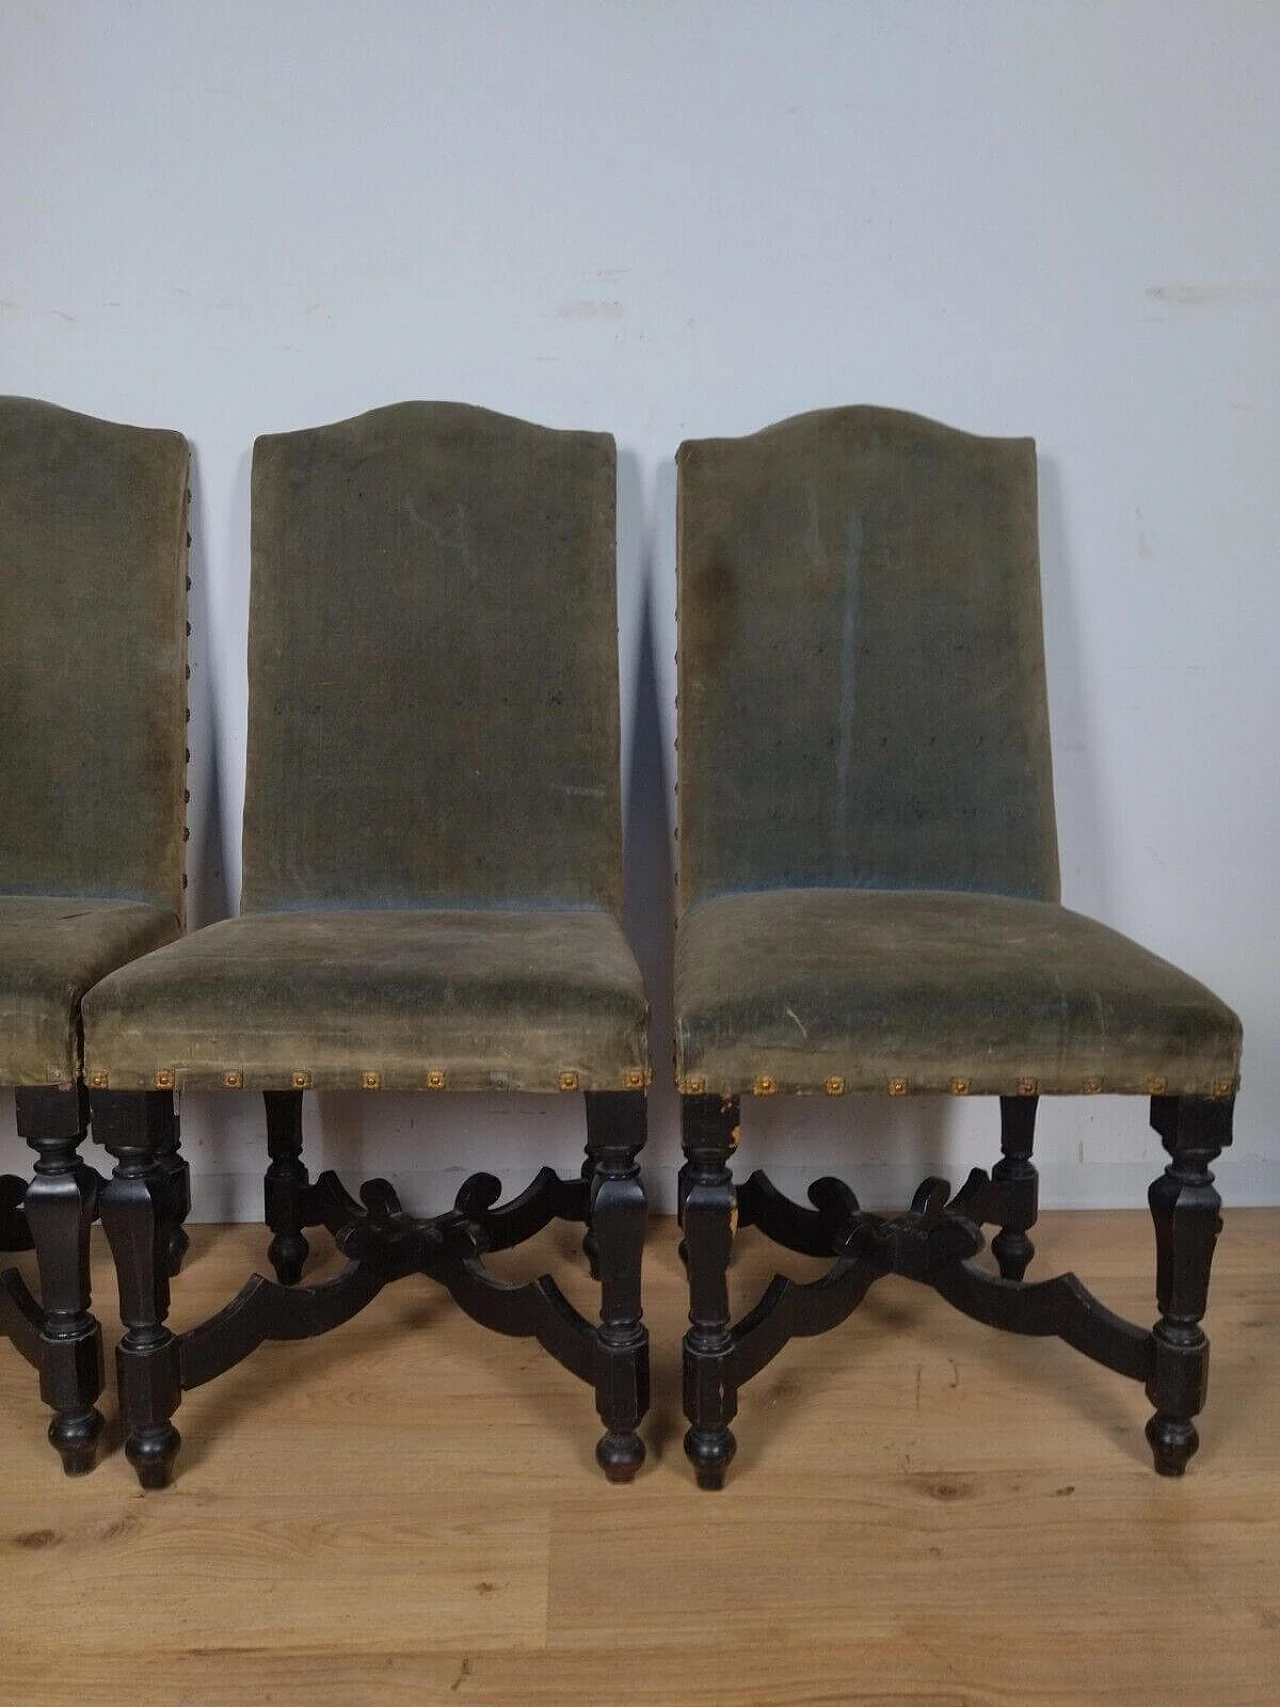 4 Rocchetto chairs in ebonised wood, 18th century 3